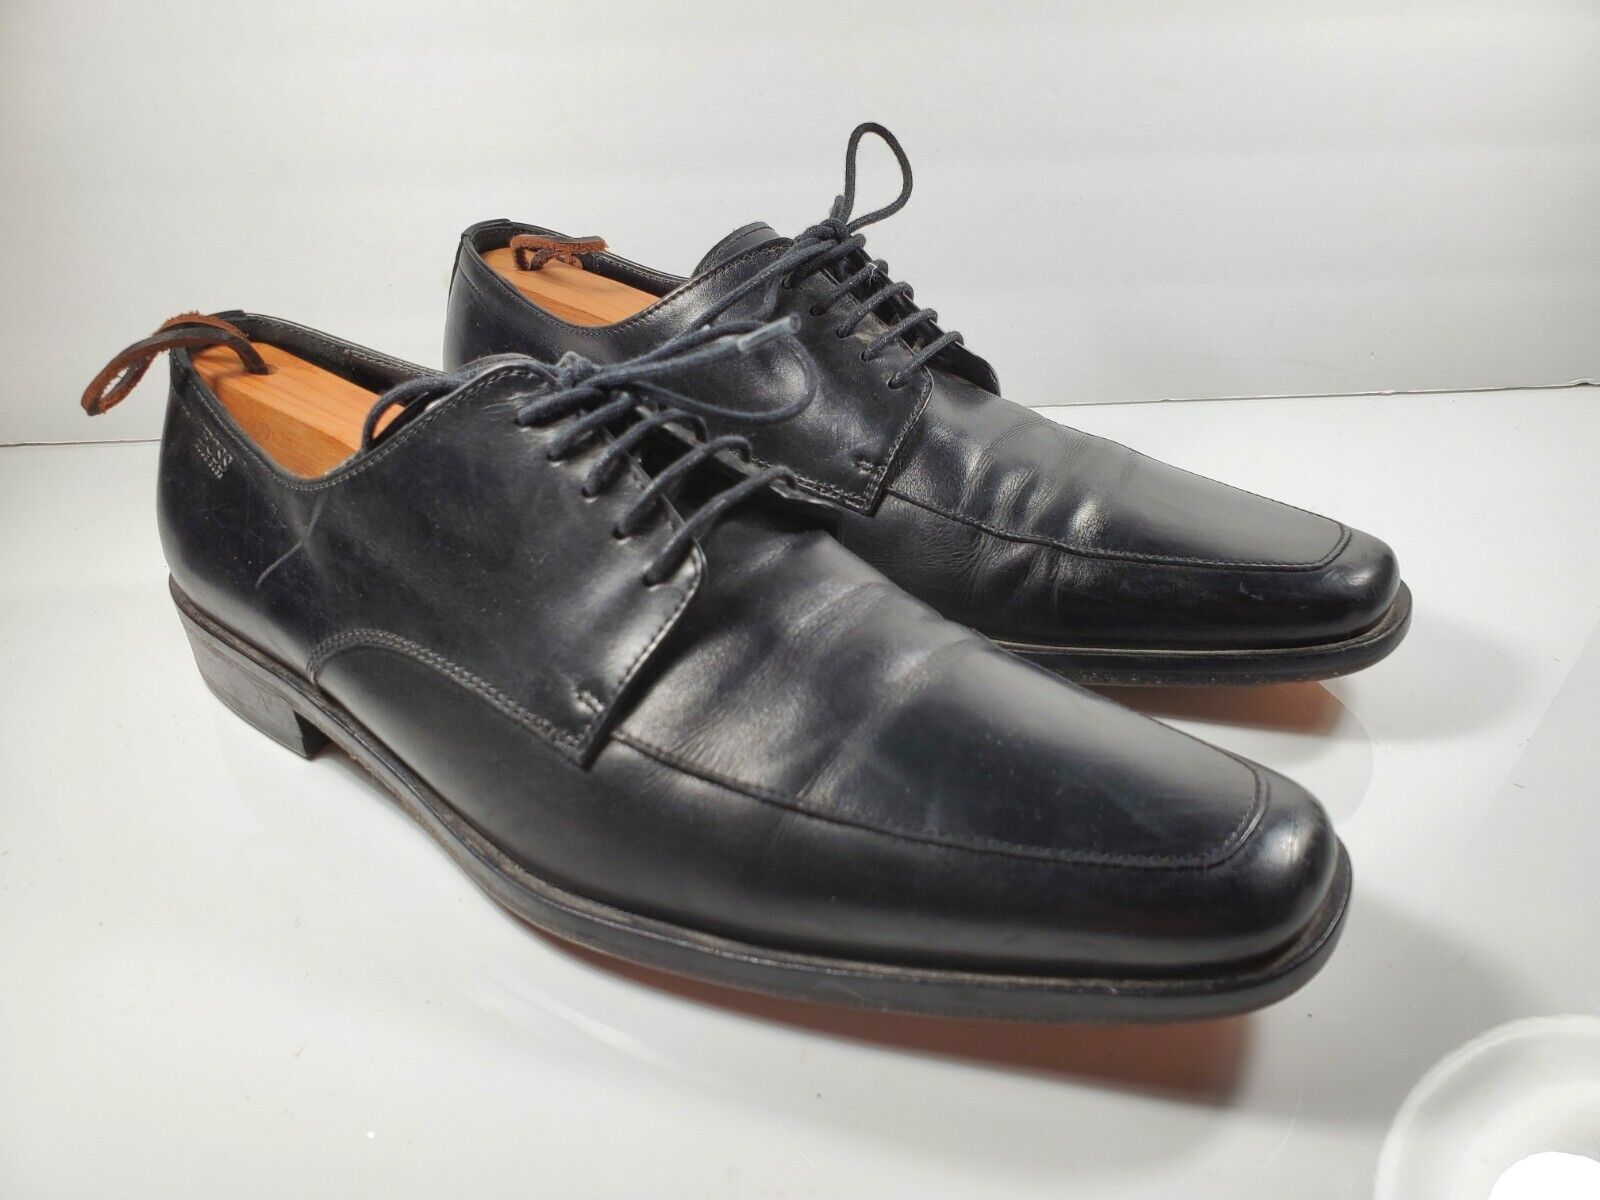 Hoopvol Munching graven Hugo Boss Mens Black Leather Lace-Up Derby Oxford Dress Shoes Italy - Size  9 | eBay